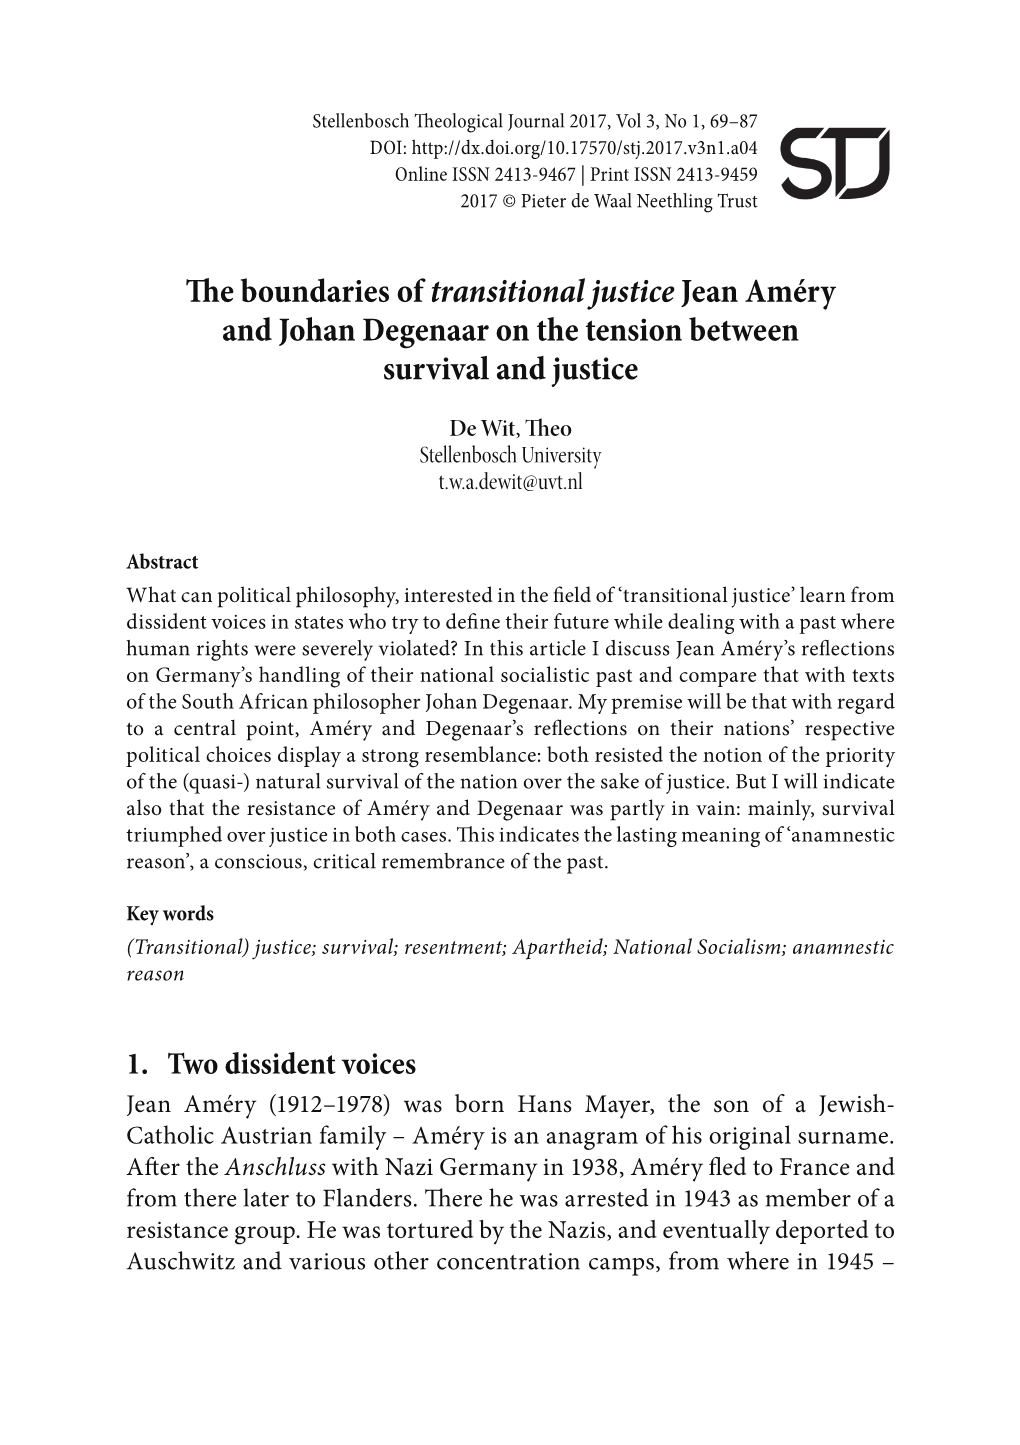 E Boundaries of Transitional Justice Jean Améry and Johan Degenaar on the Tension Between Survival and Justice